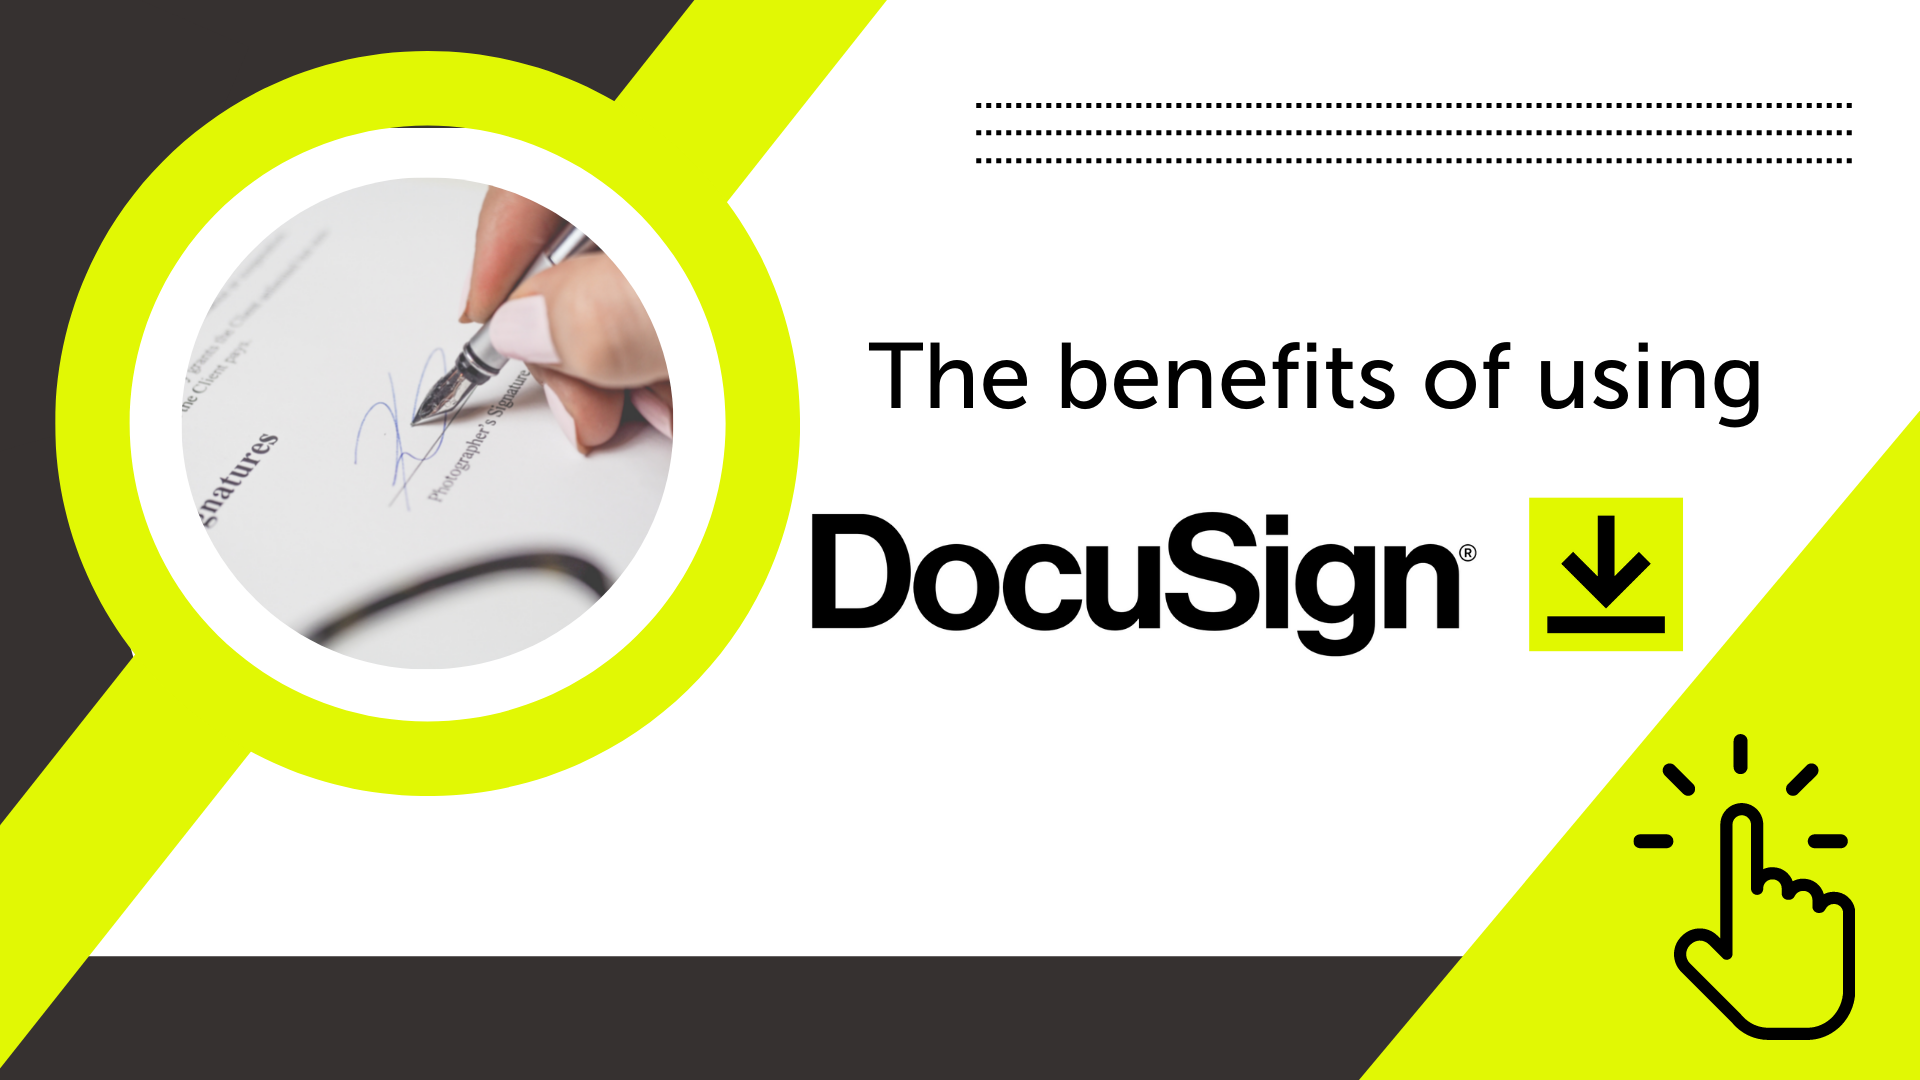 The benefits of using DocuSign to sign your documents